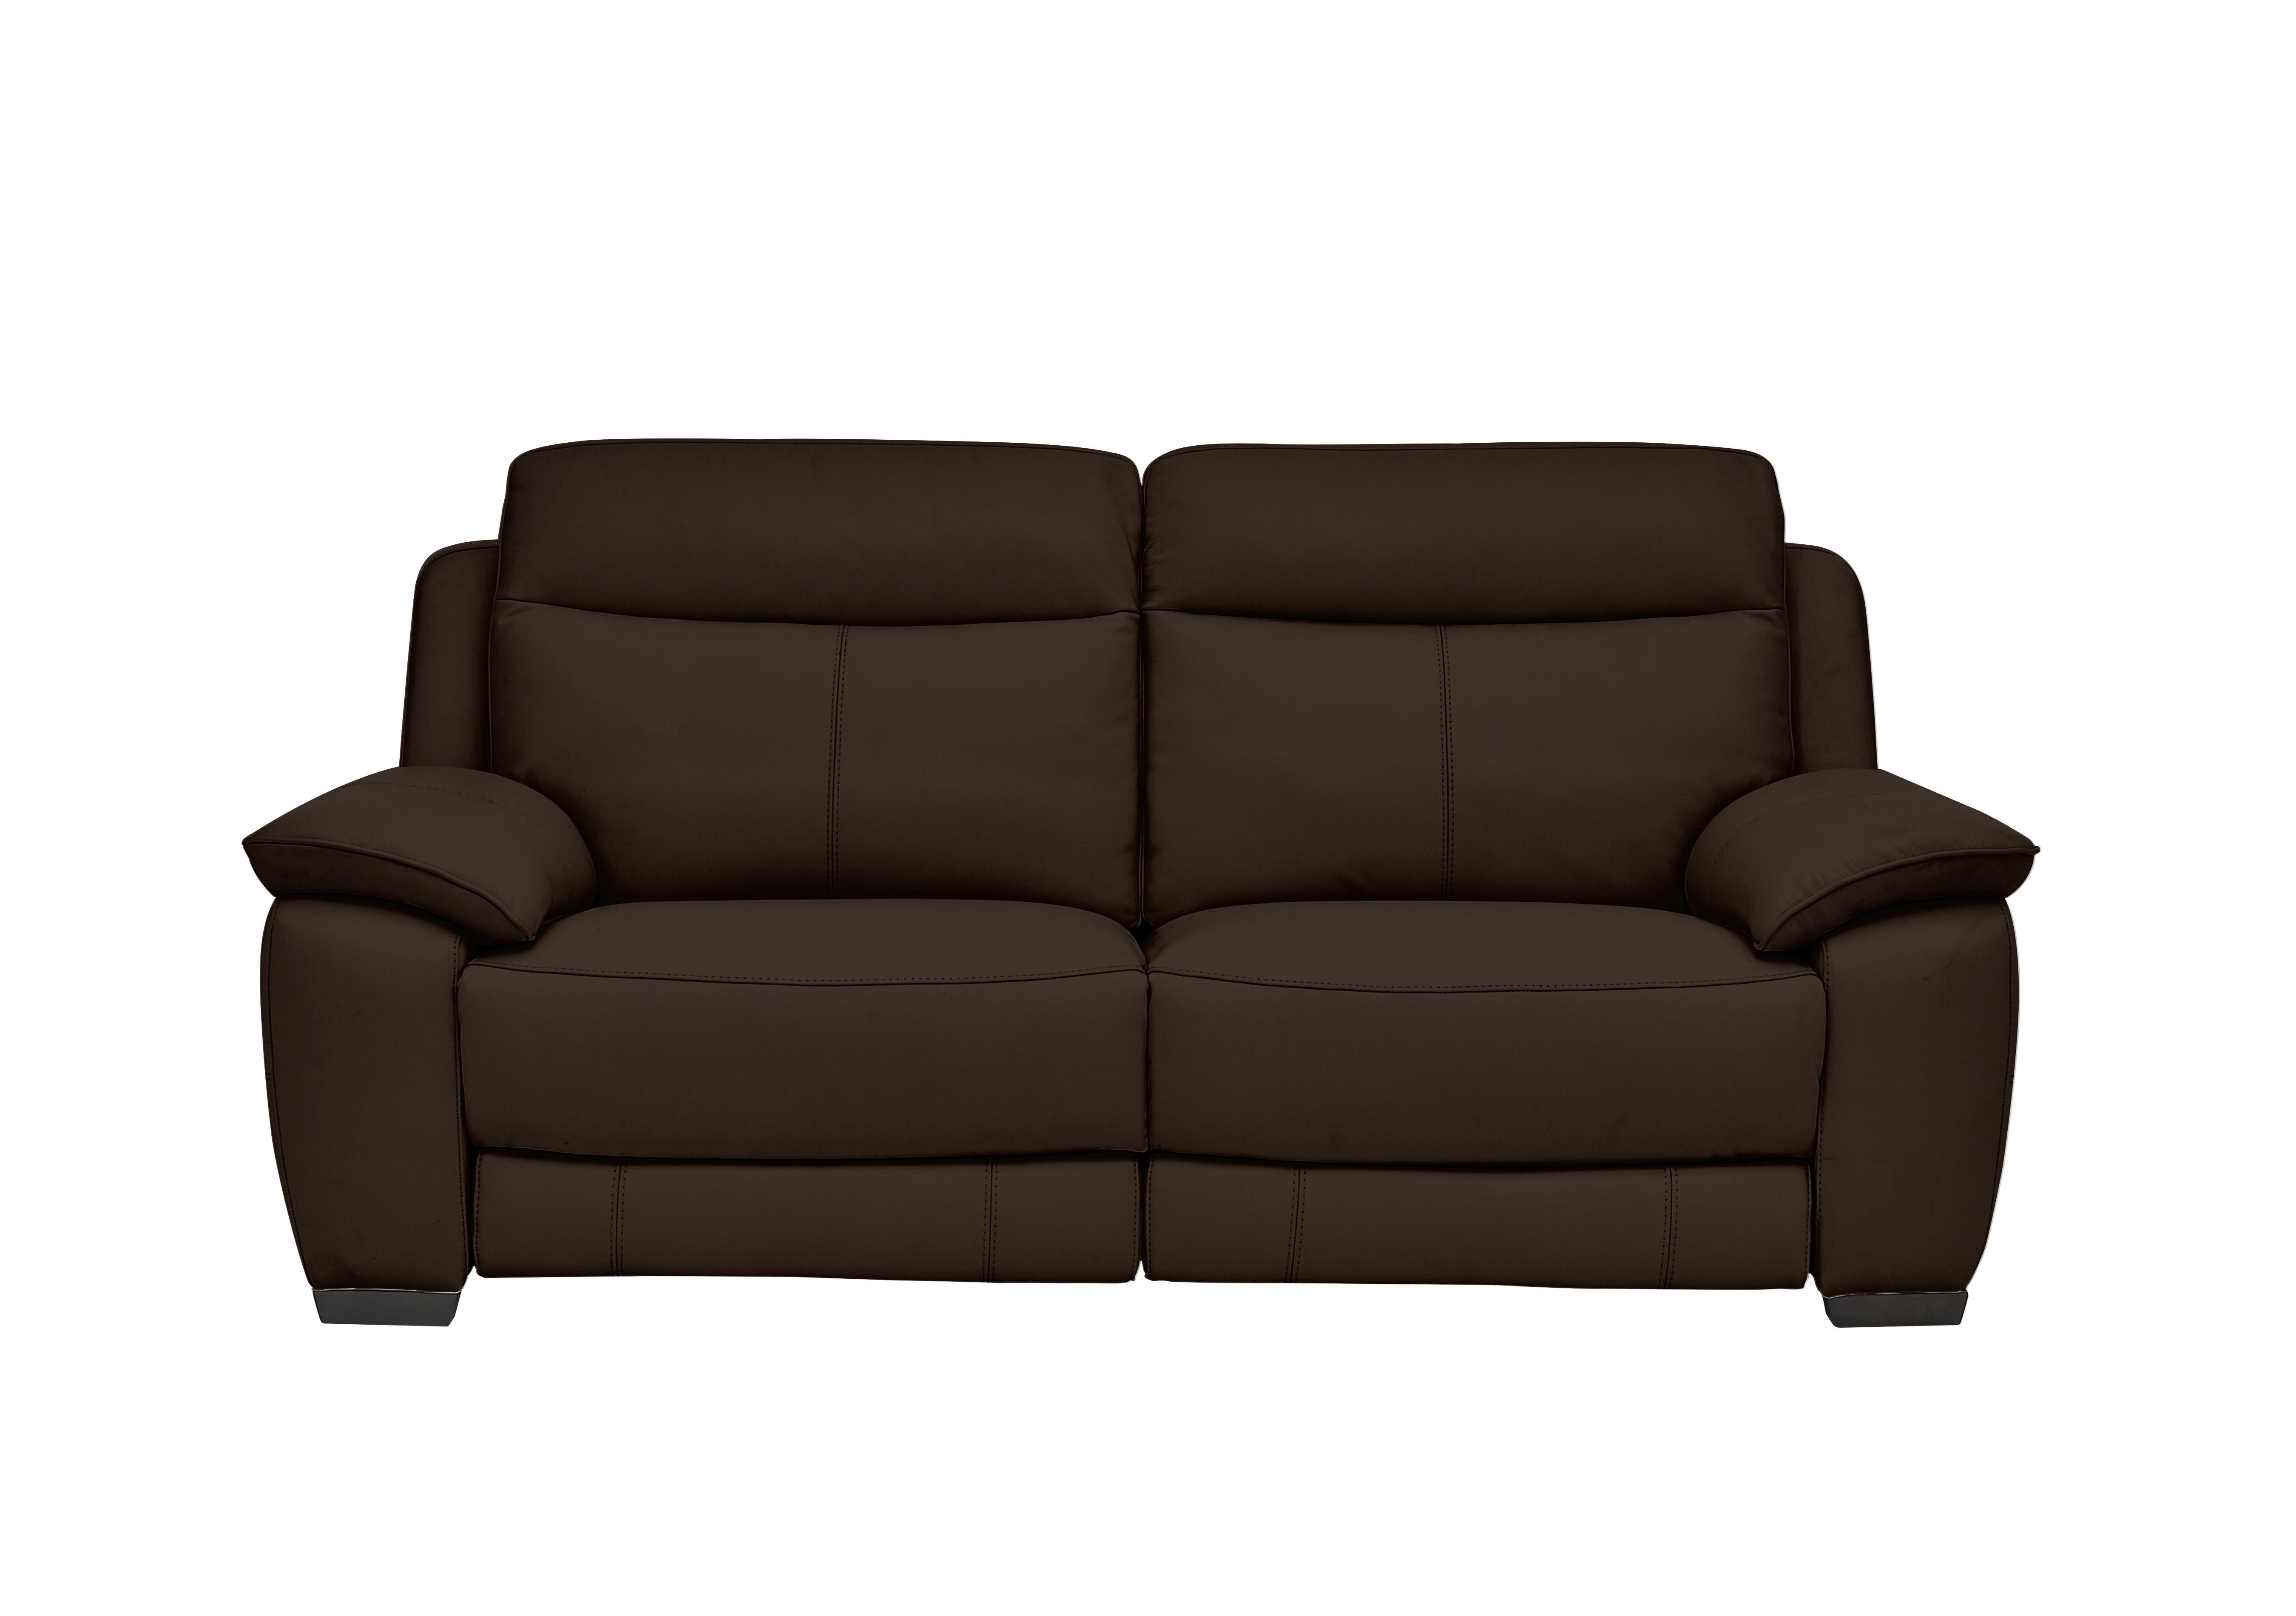 Starlight Express 3 Seater Leather Recliner Sofa with Power Headrests in Bv-1748 Dark  Chocolate on Furniture Village